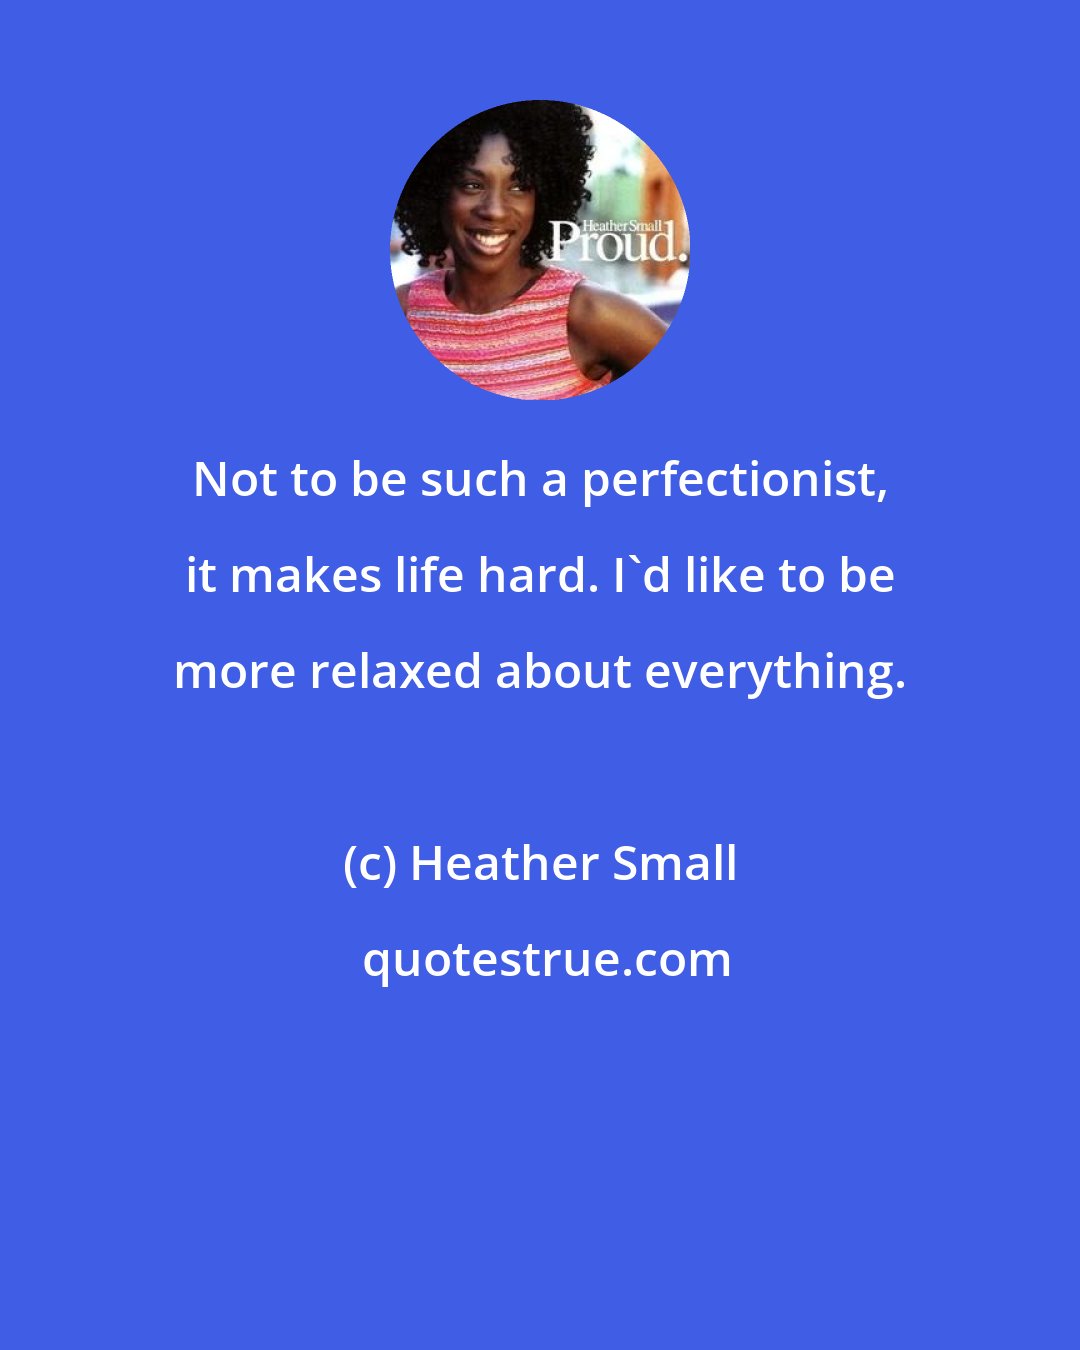 Heather Small: Not to be such a perfectionist, it makes life hard. I'd like to be more relaxed about everything.